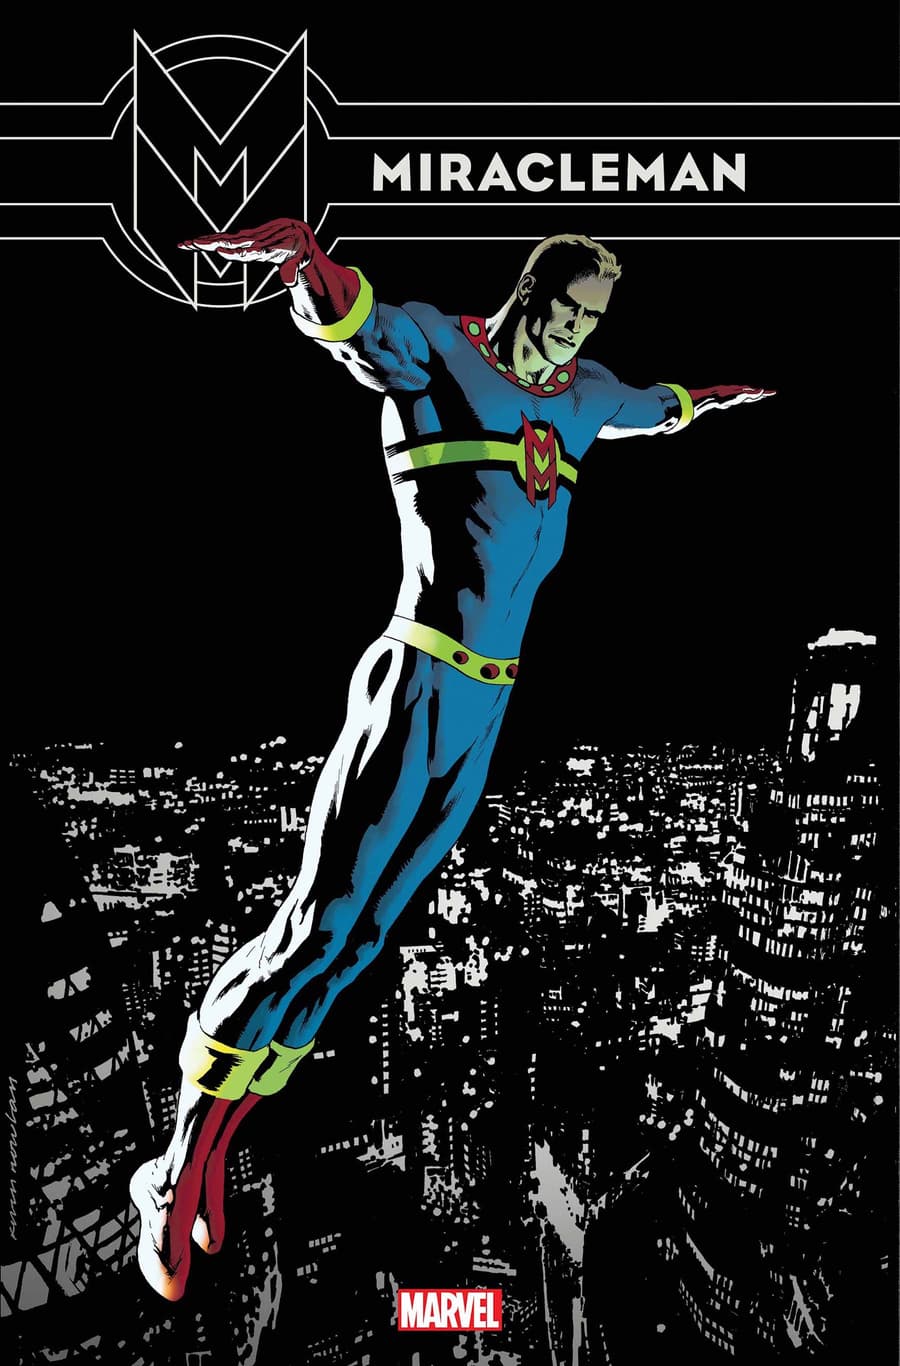 MIRACLEMAN OMNIBUS DM Variant Cover by KEVIN NOWLAN